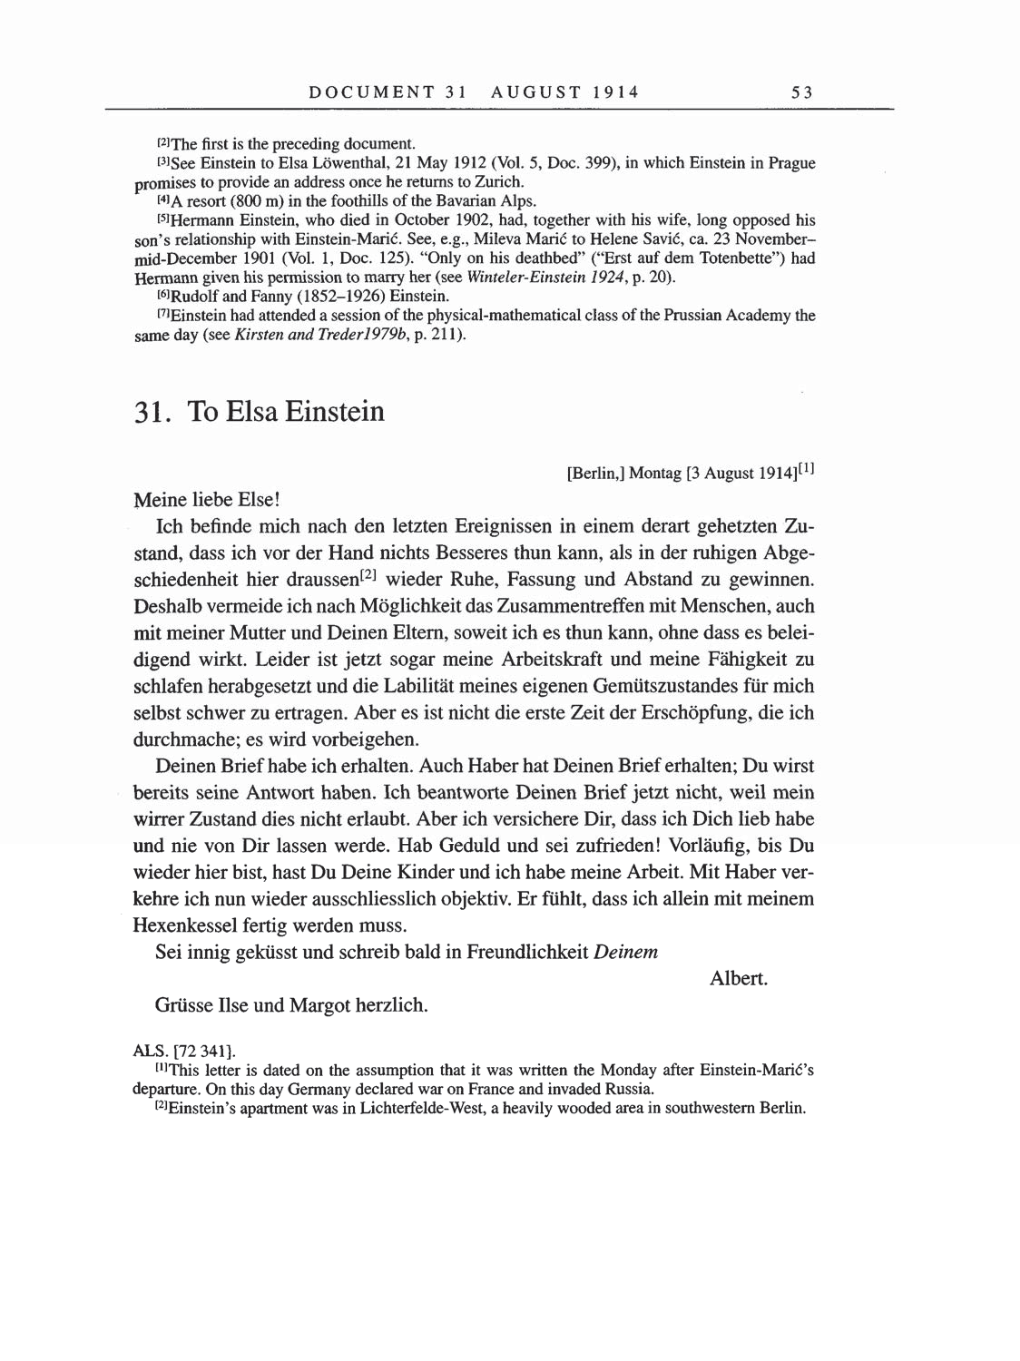 Volume 8, Part A: The Berlin Years: Correspondence 1914-1917 page 53